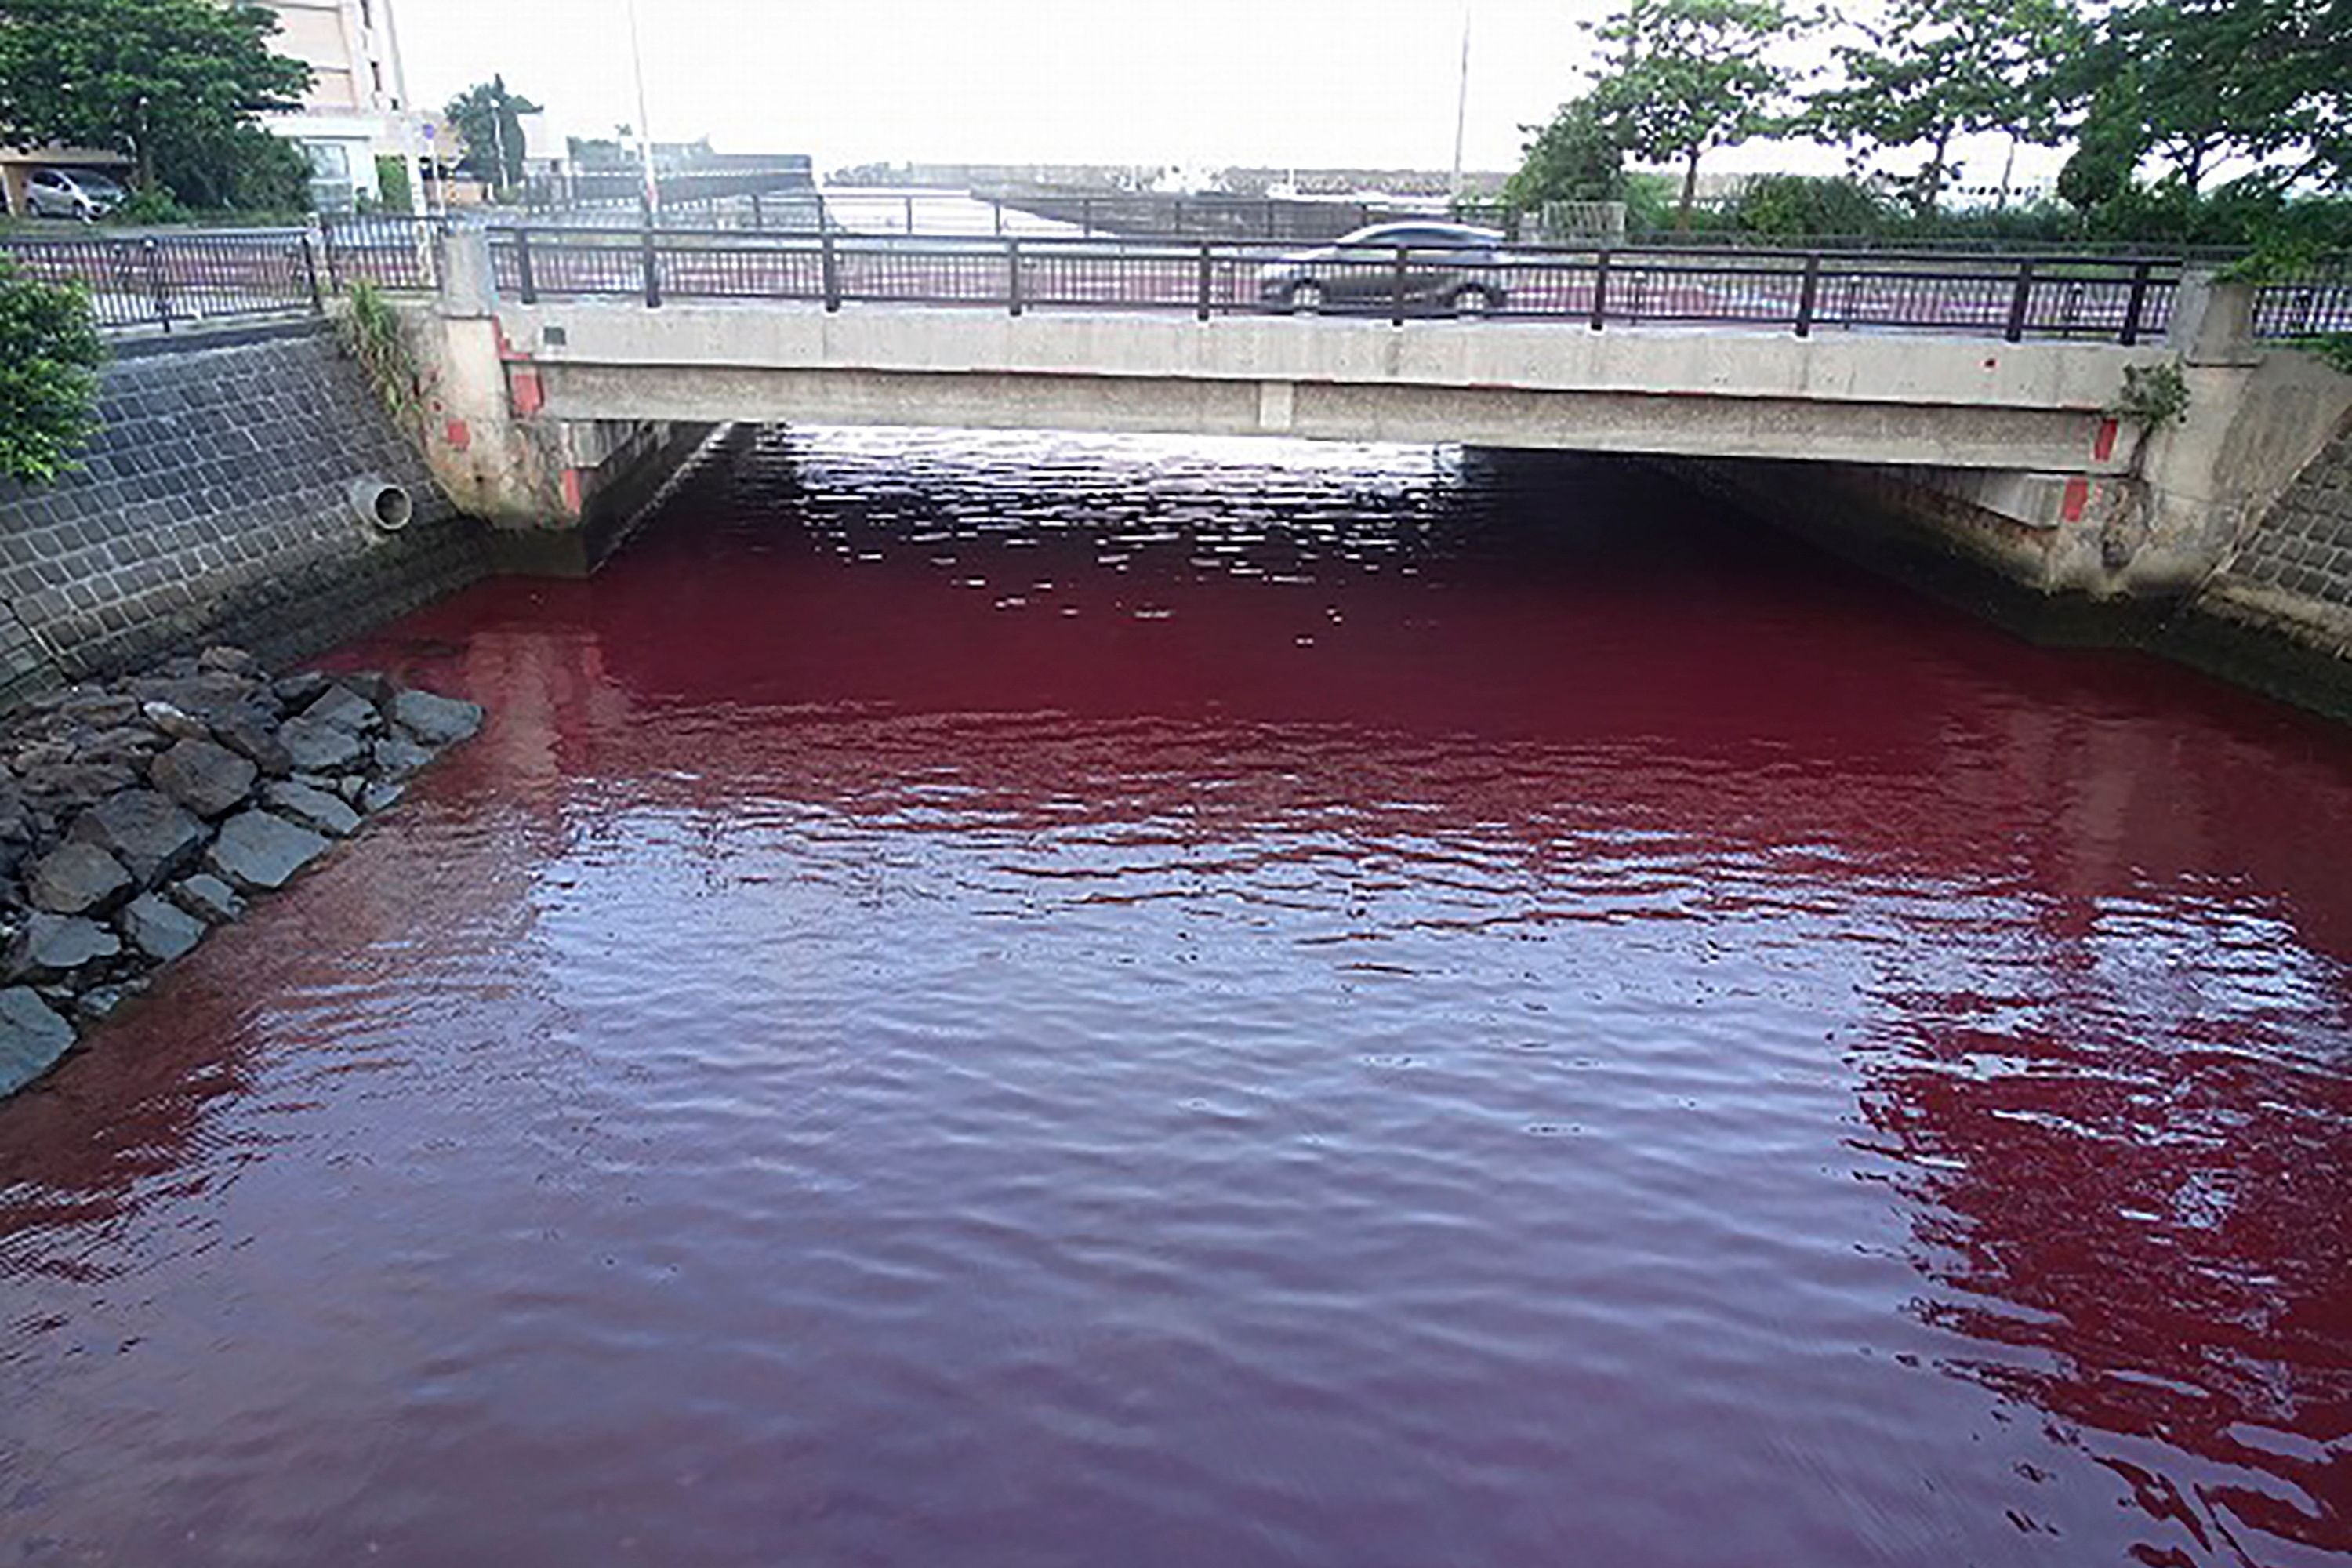 Visuals of the river in Nago city in Japan’s Okinawa showed the flowing water had turned deep red in colour